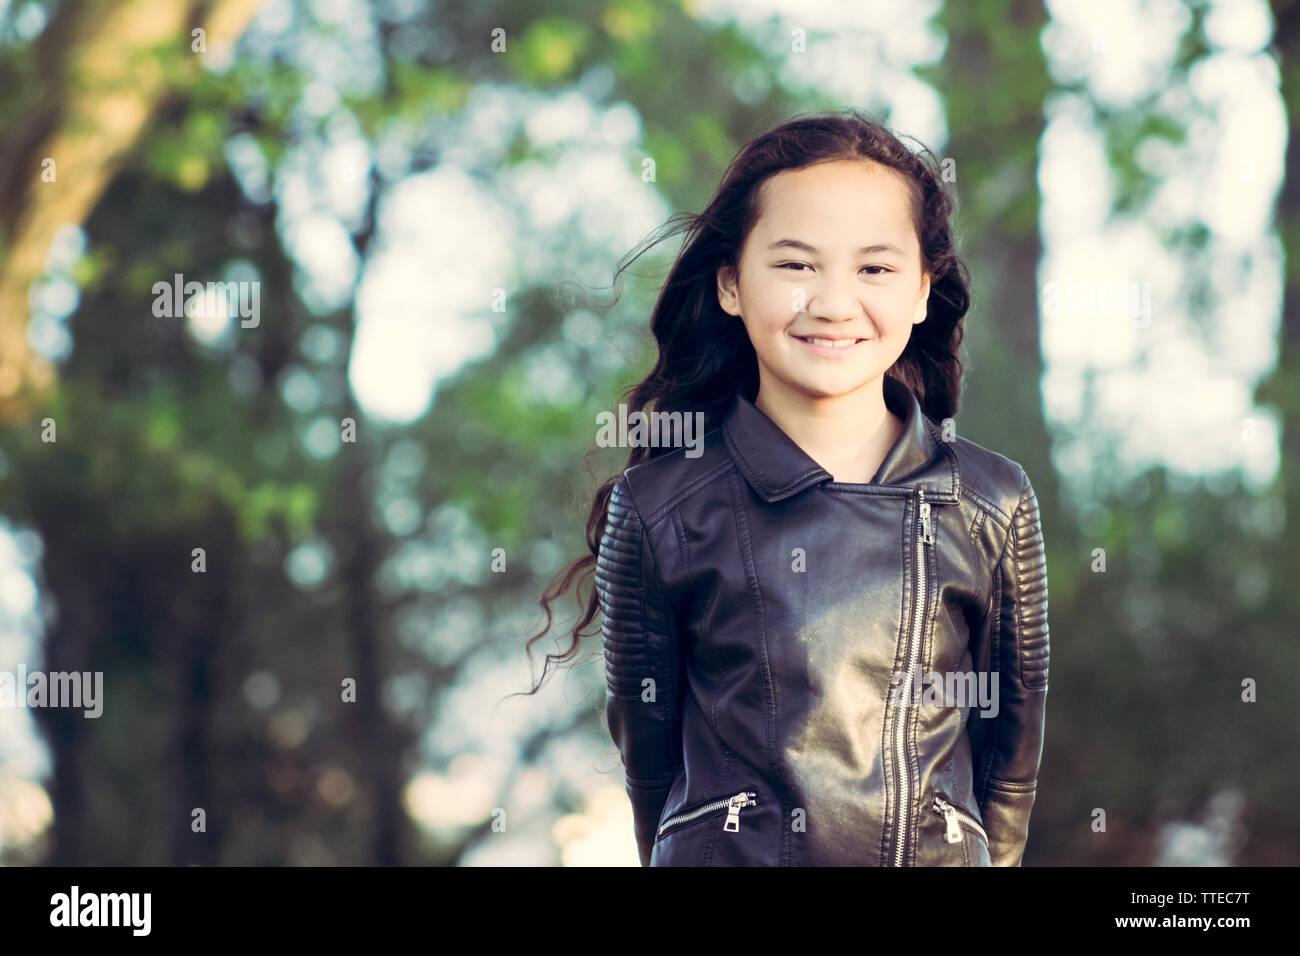 Portrait image of a young Maori girl taken outdoors in a park with copy space Stock Photo